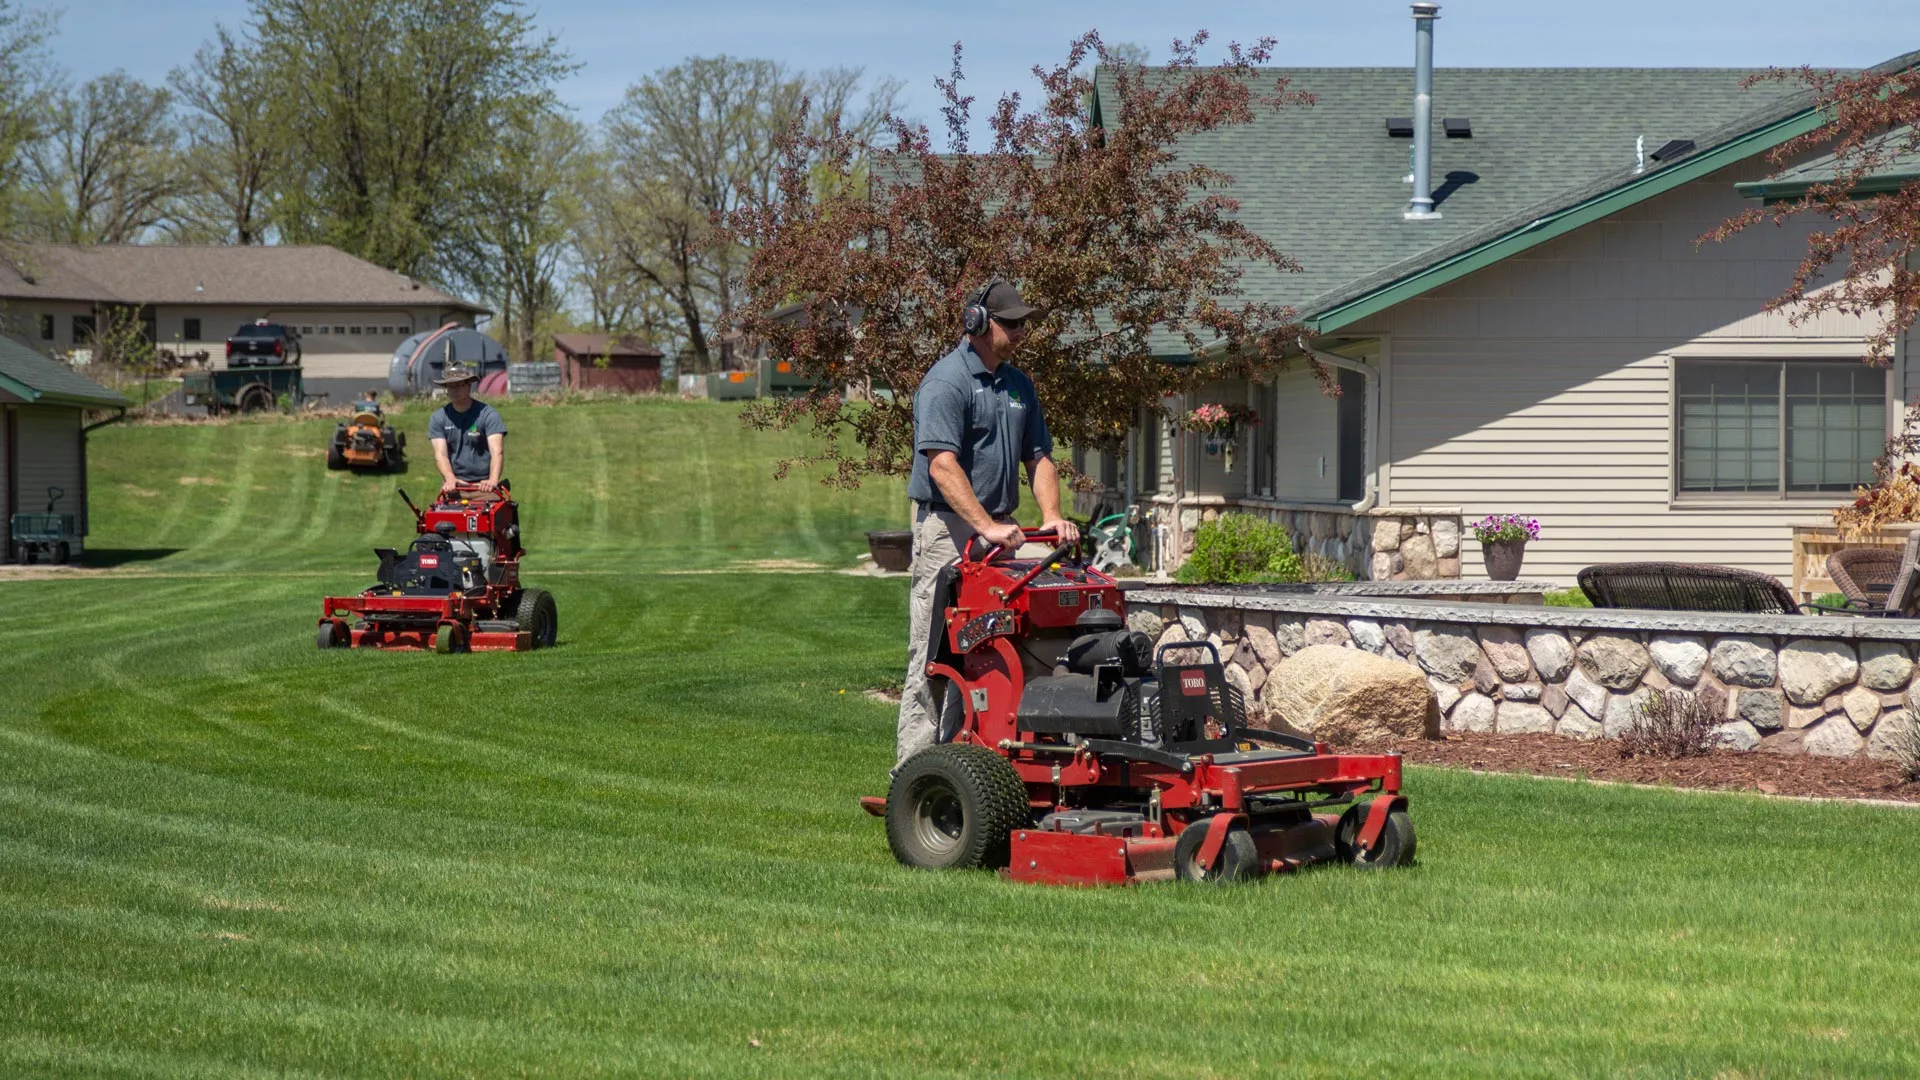 Property in Detroit Lakes, MN that has a regular lawn mowing and maintenance package with Miller Yard Care & Construction.